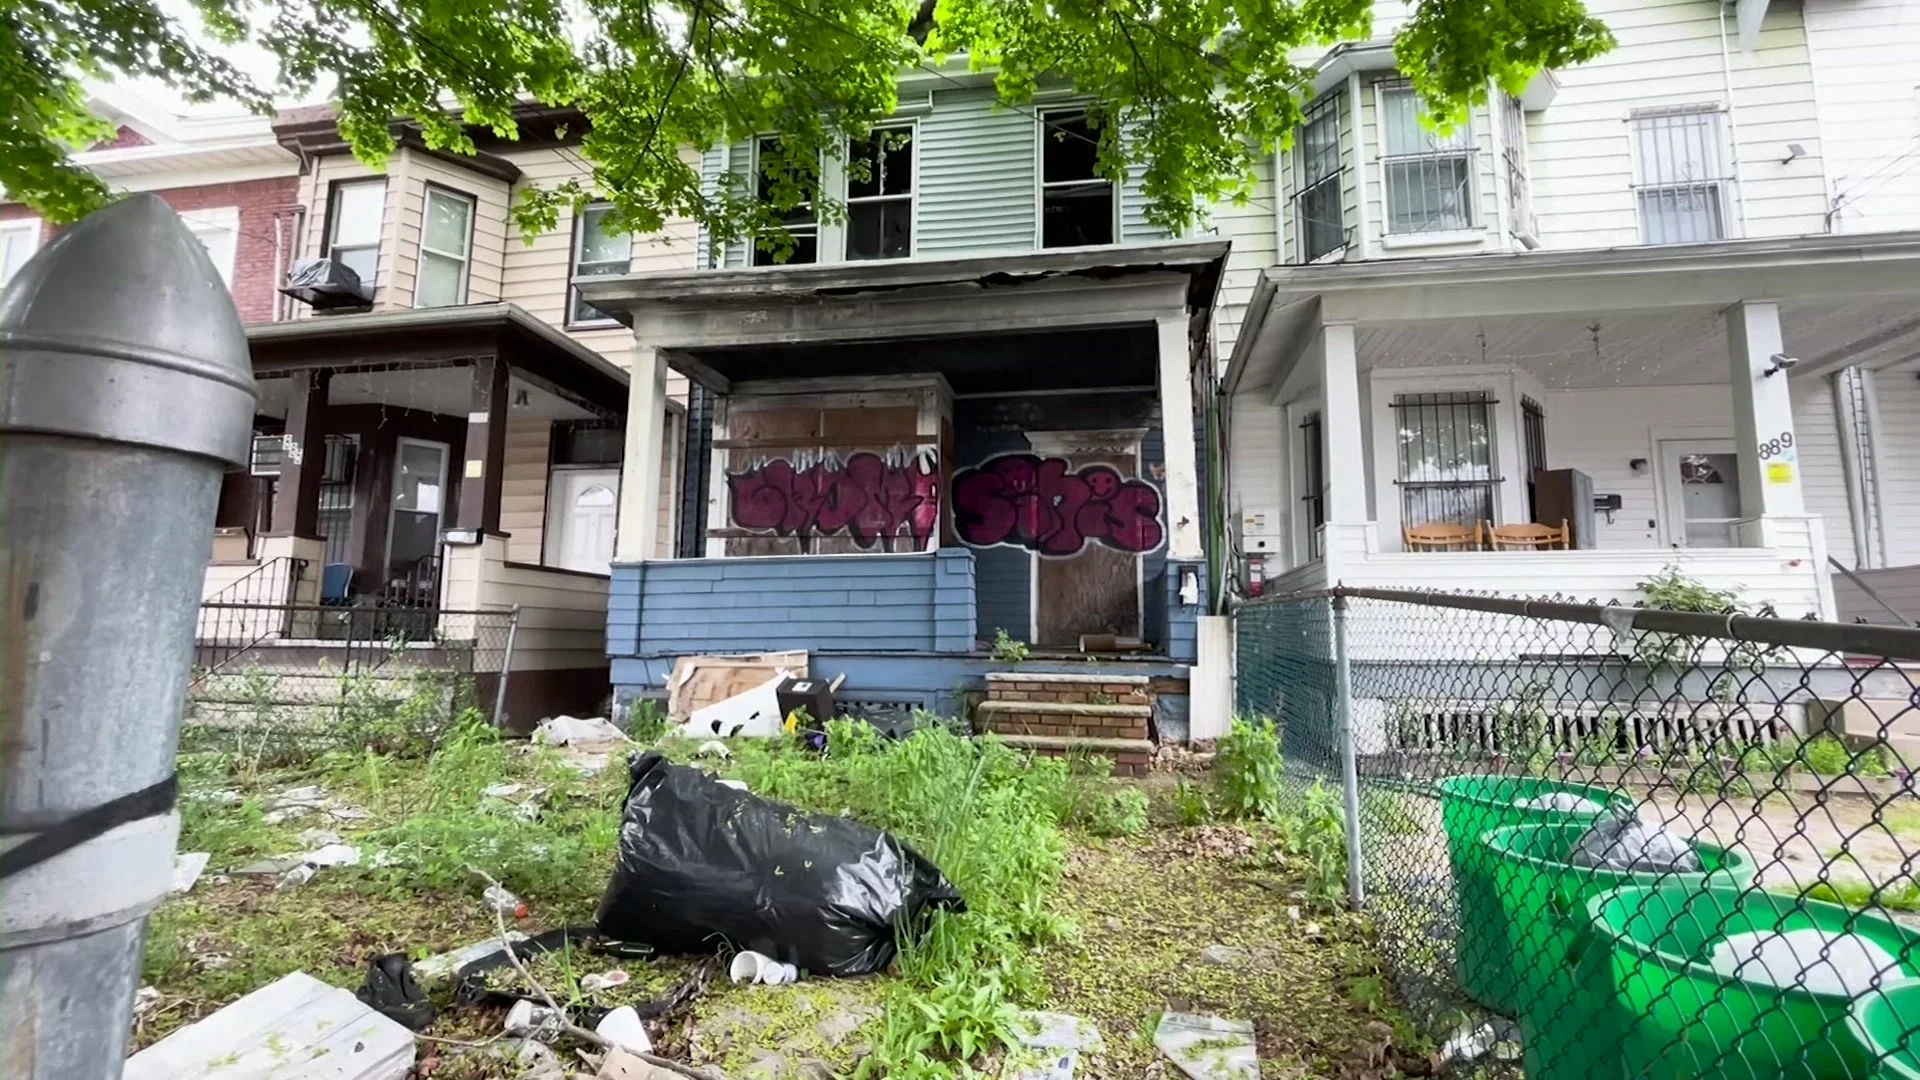 Paterson resident voices concerns about health and safety risks from abandoned home near his property